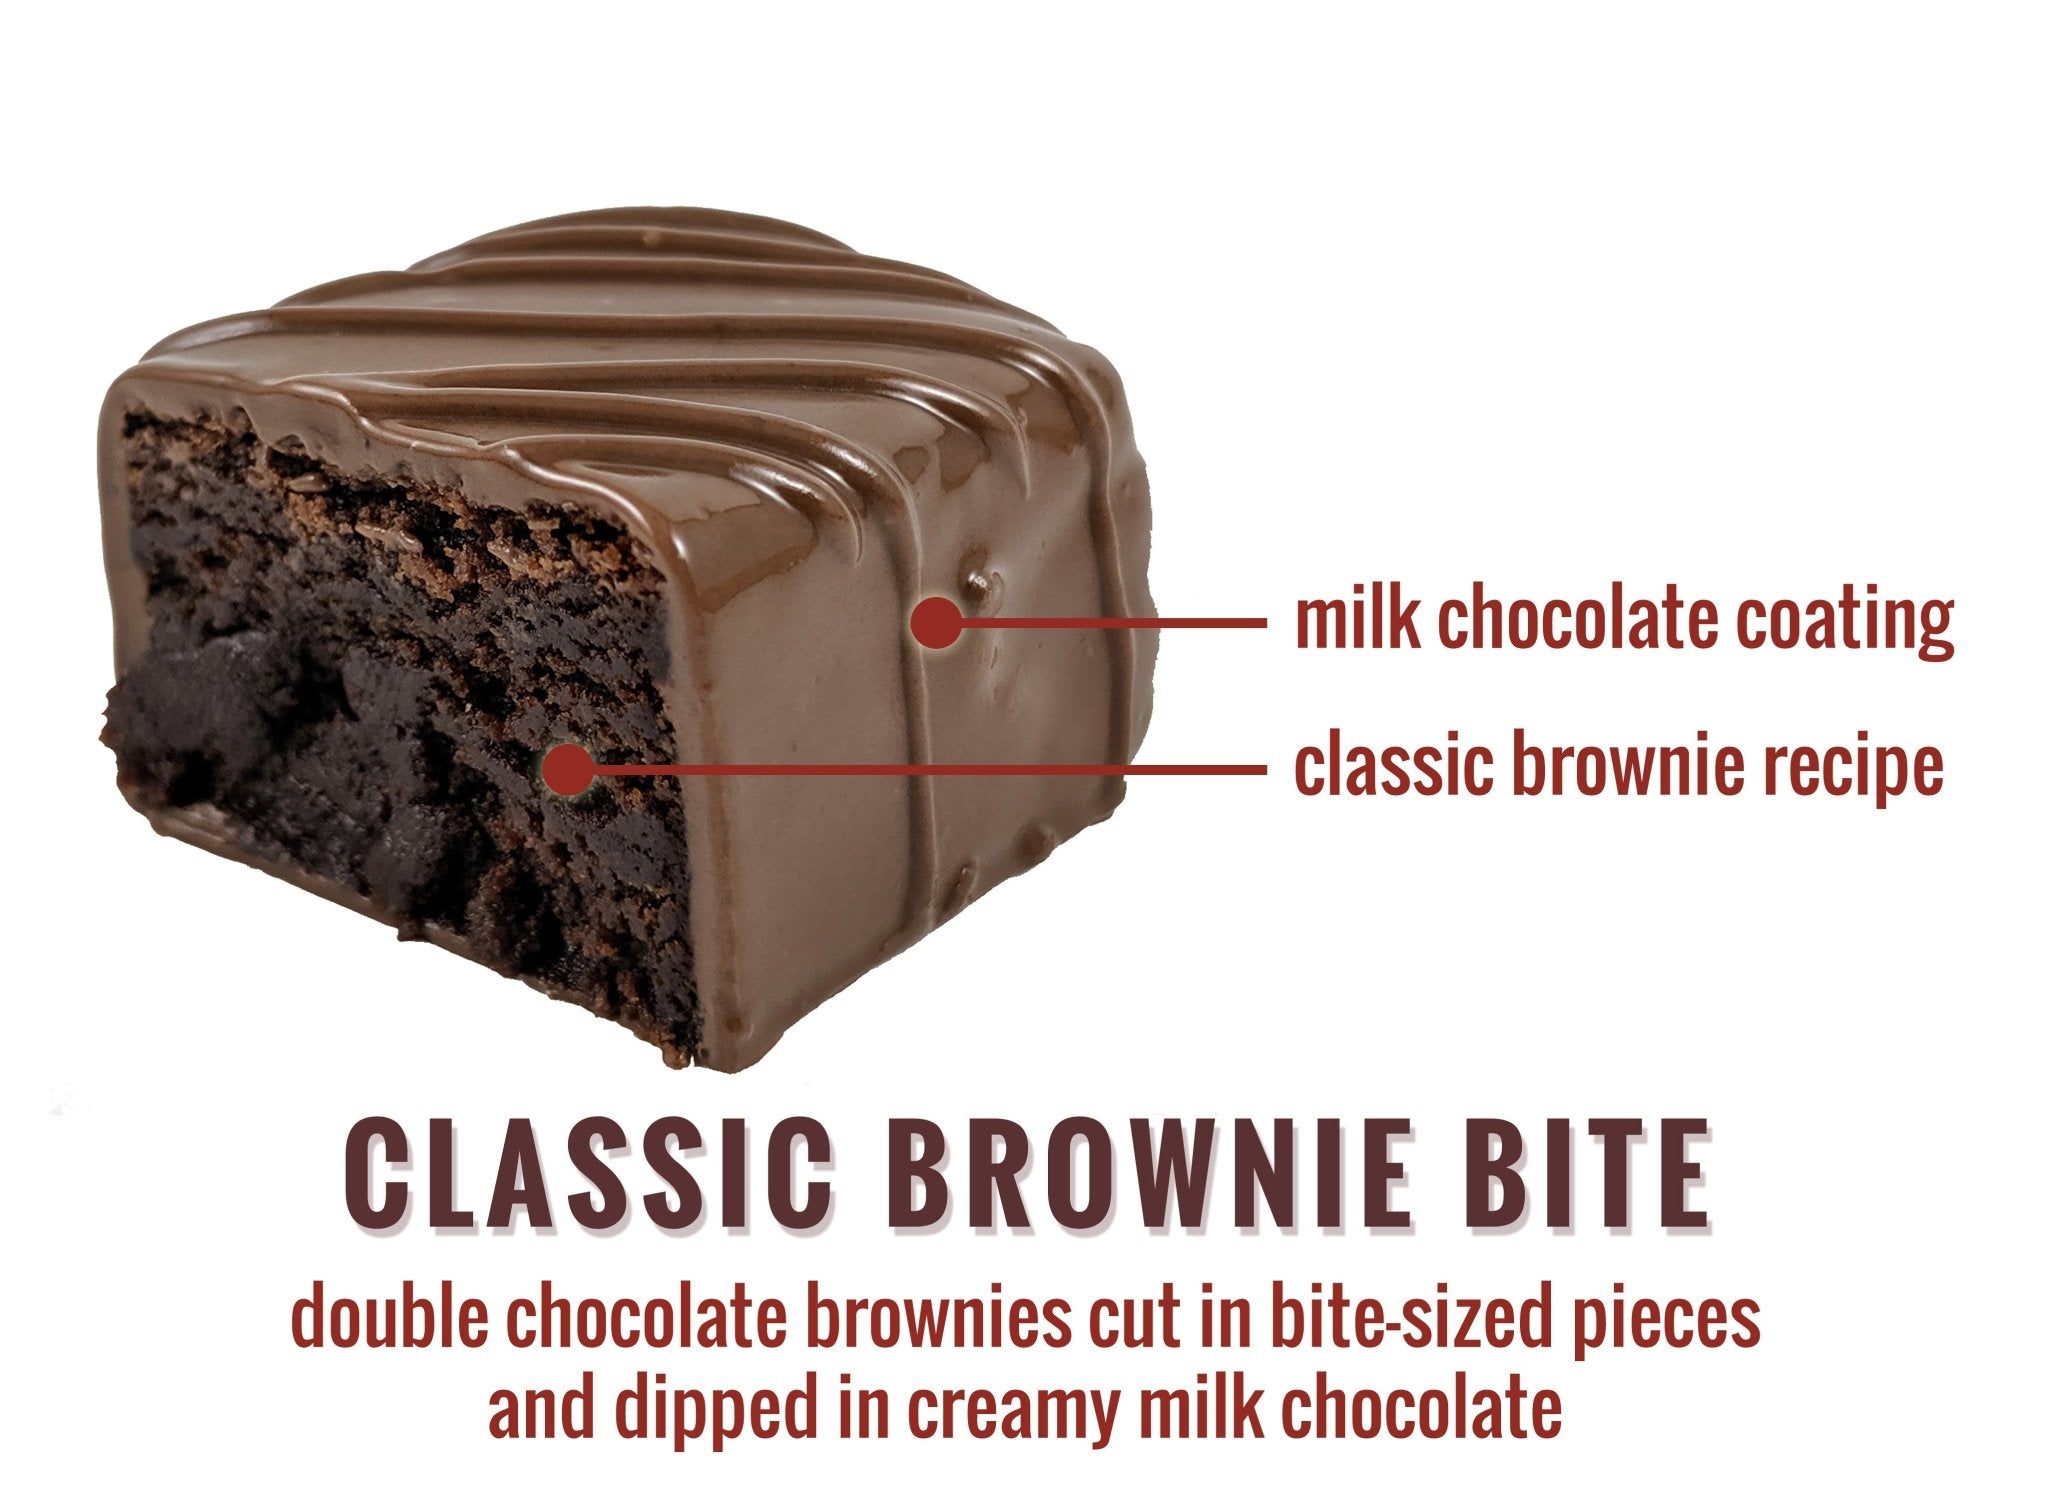 Elevate Your Baking: Crafting Irresistible Cannabis-Infused Brownies with a Twist